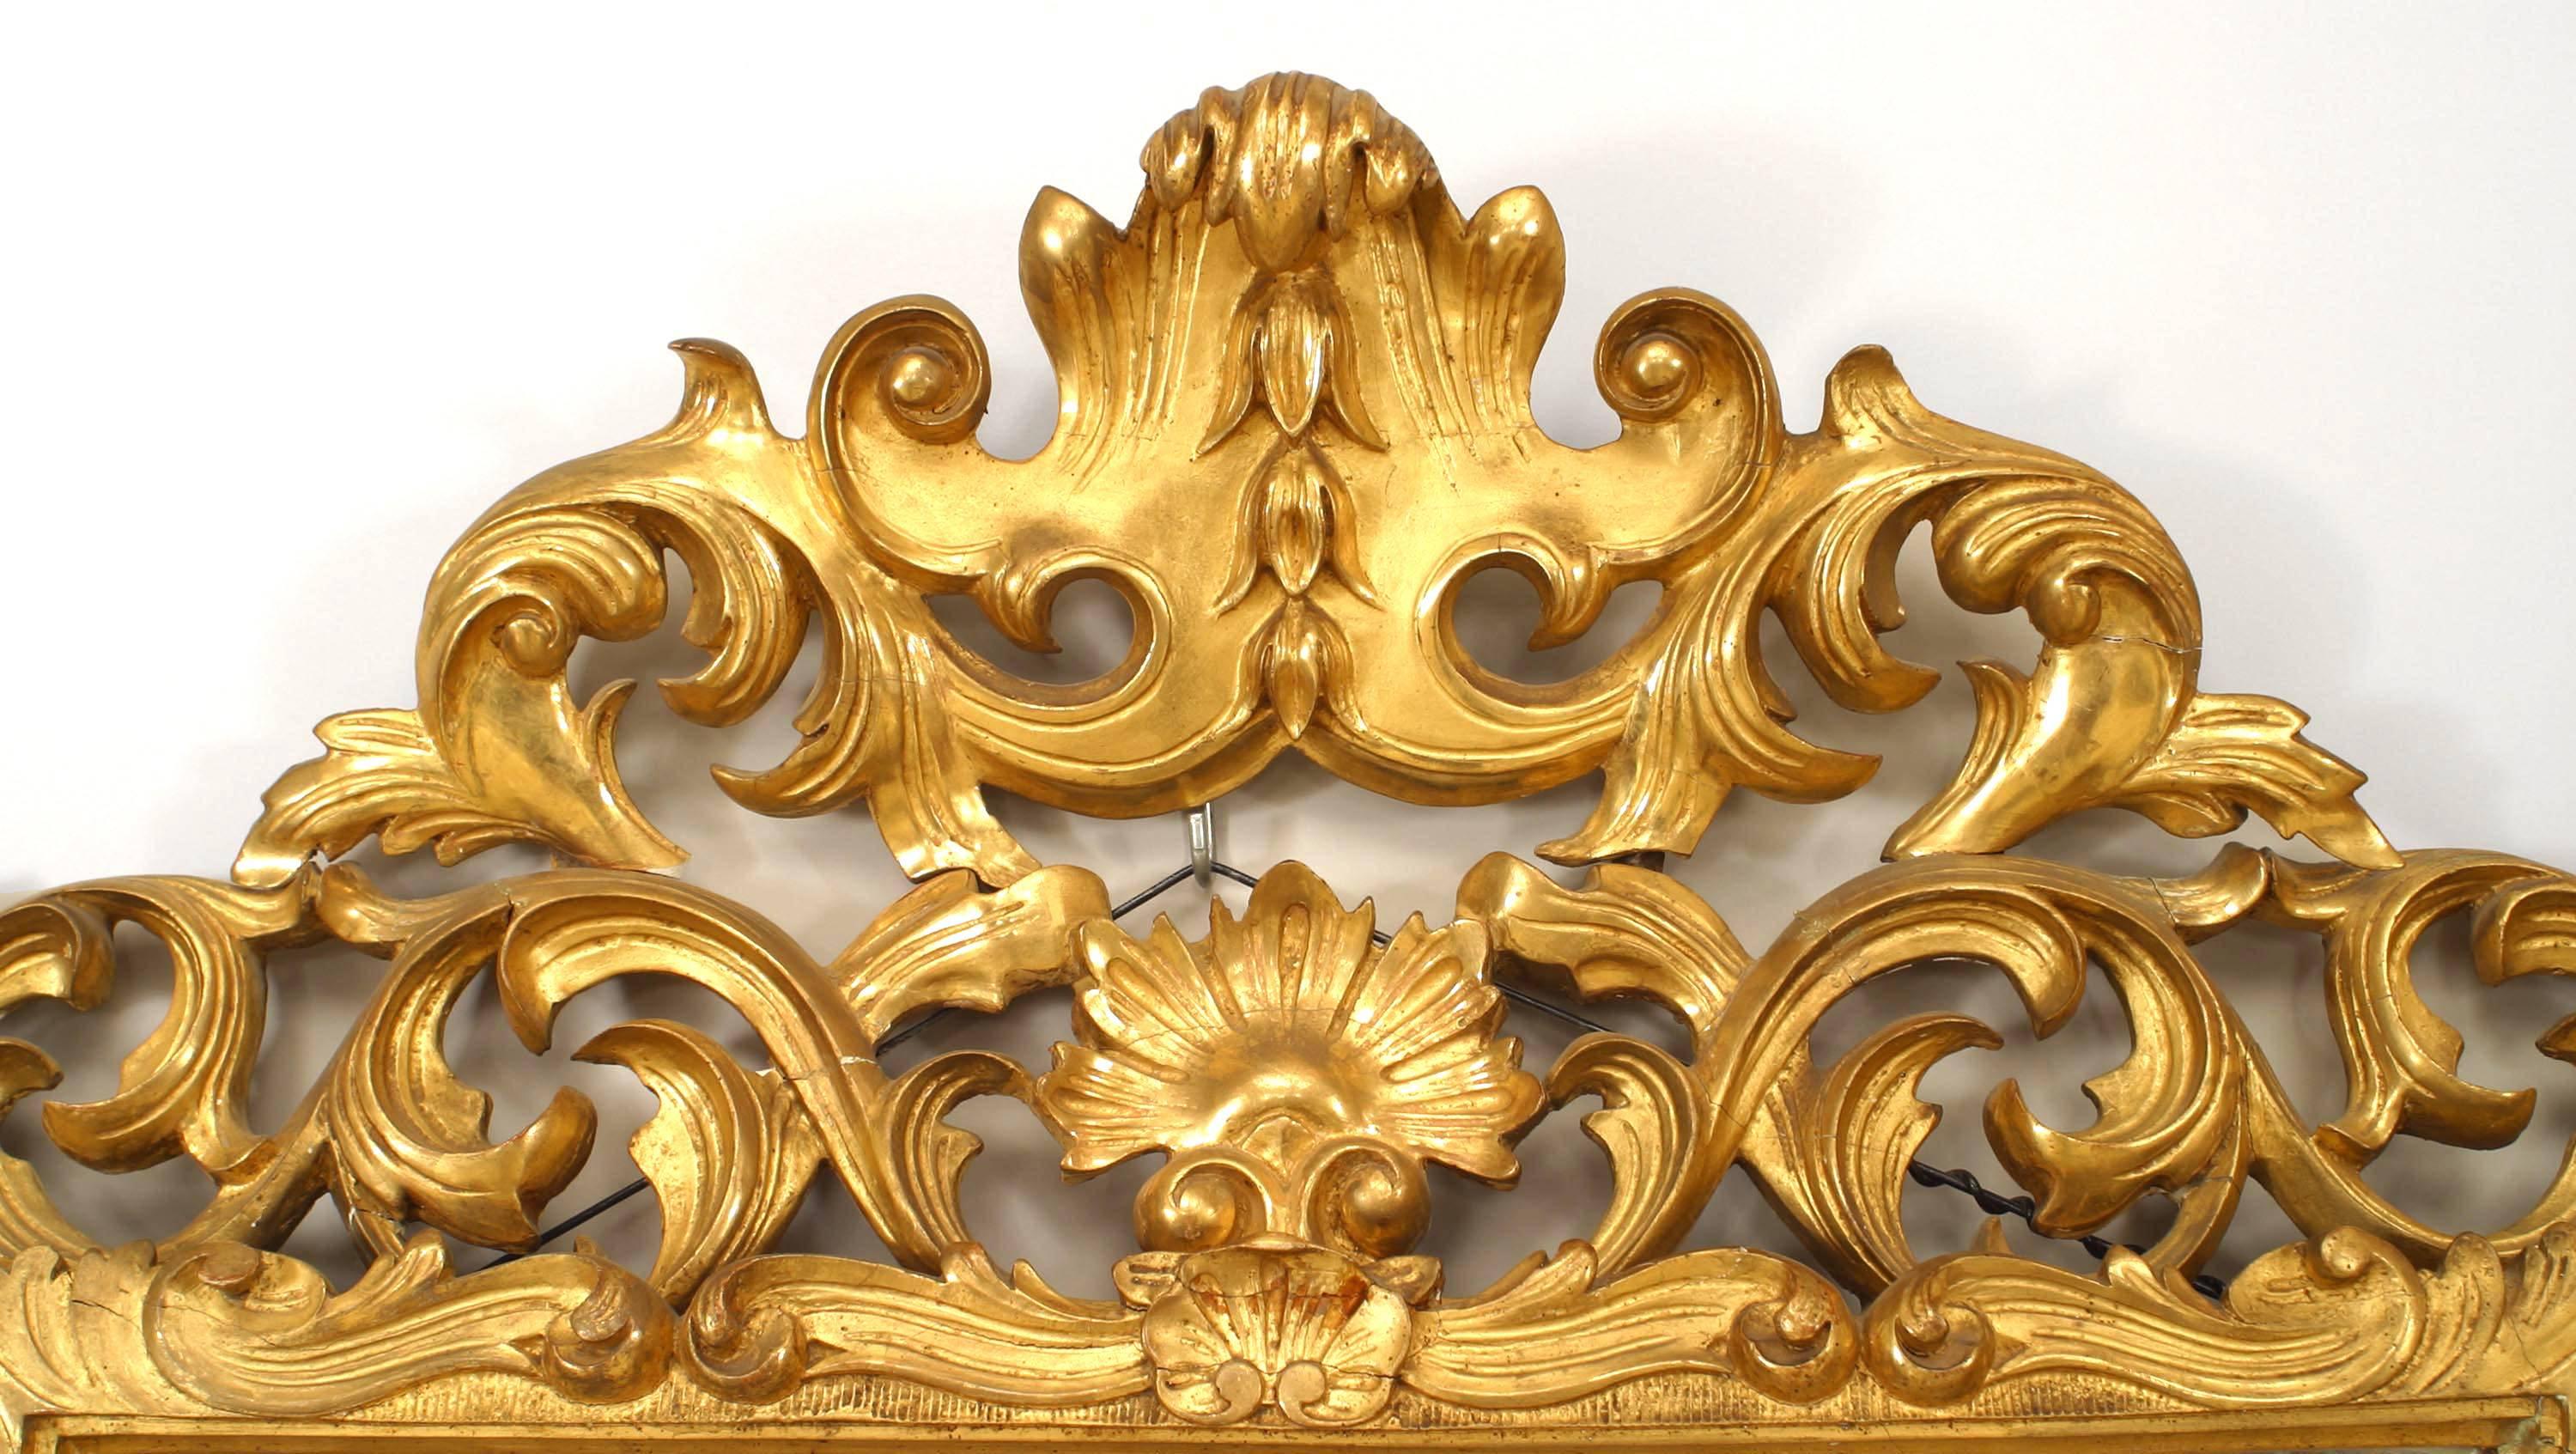 Italian Rococo Florentine style (19th century) giltwood wall mirror with ornately filigree scroll carved frame with a bevelled glass.
        